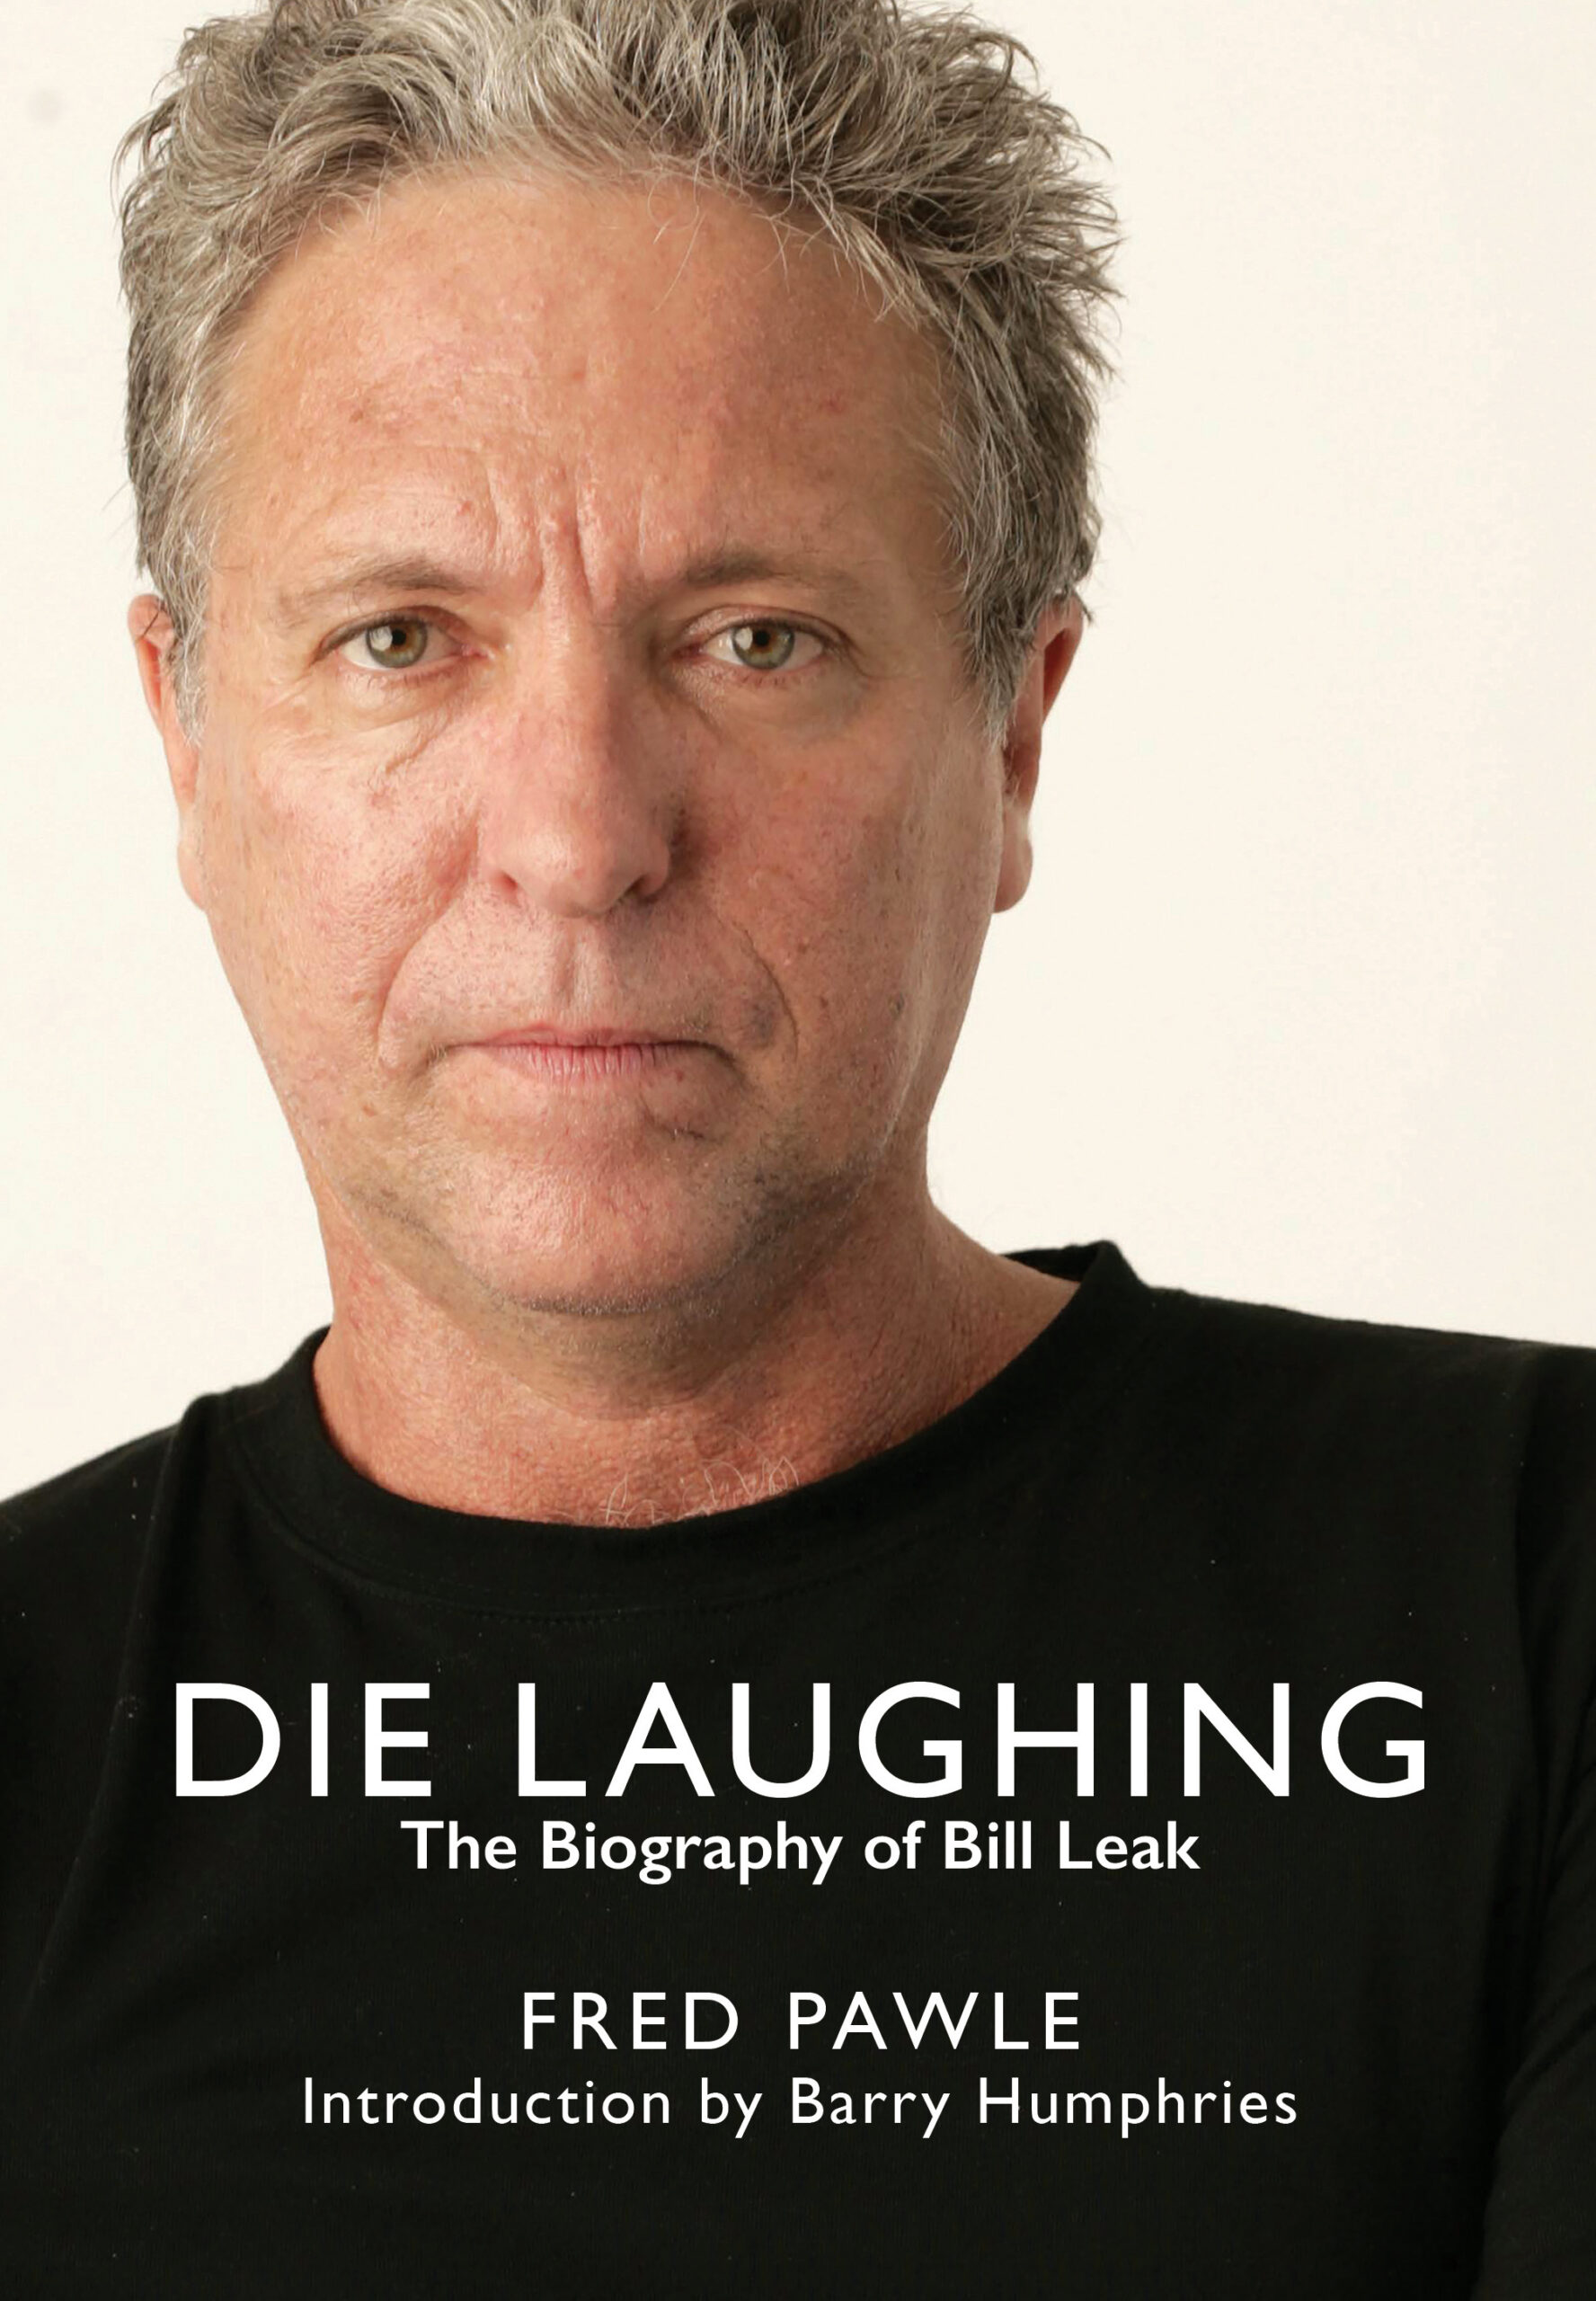 Die Laughing The Biography of Bill Leak / Fred Pawle